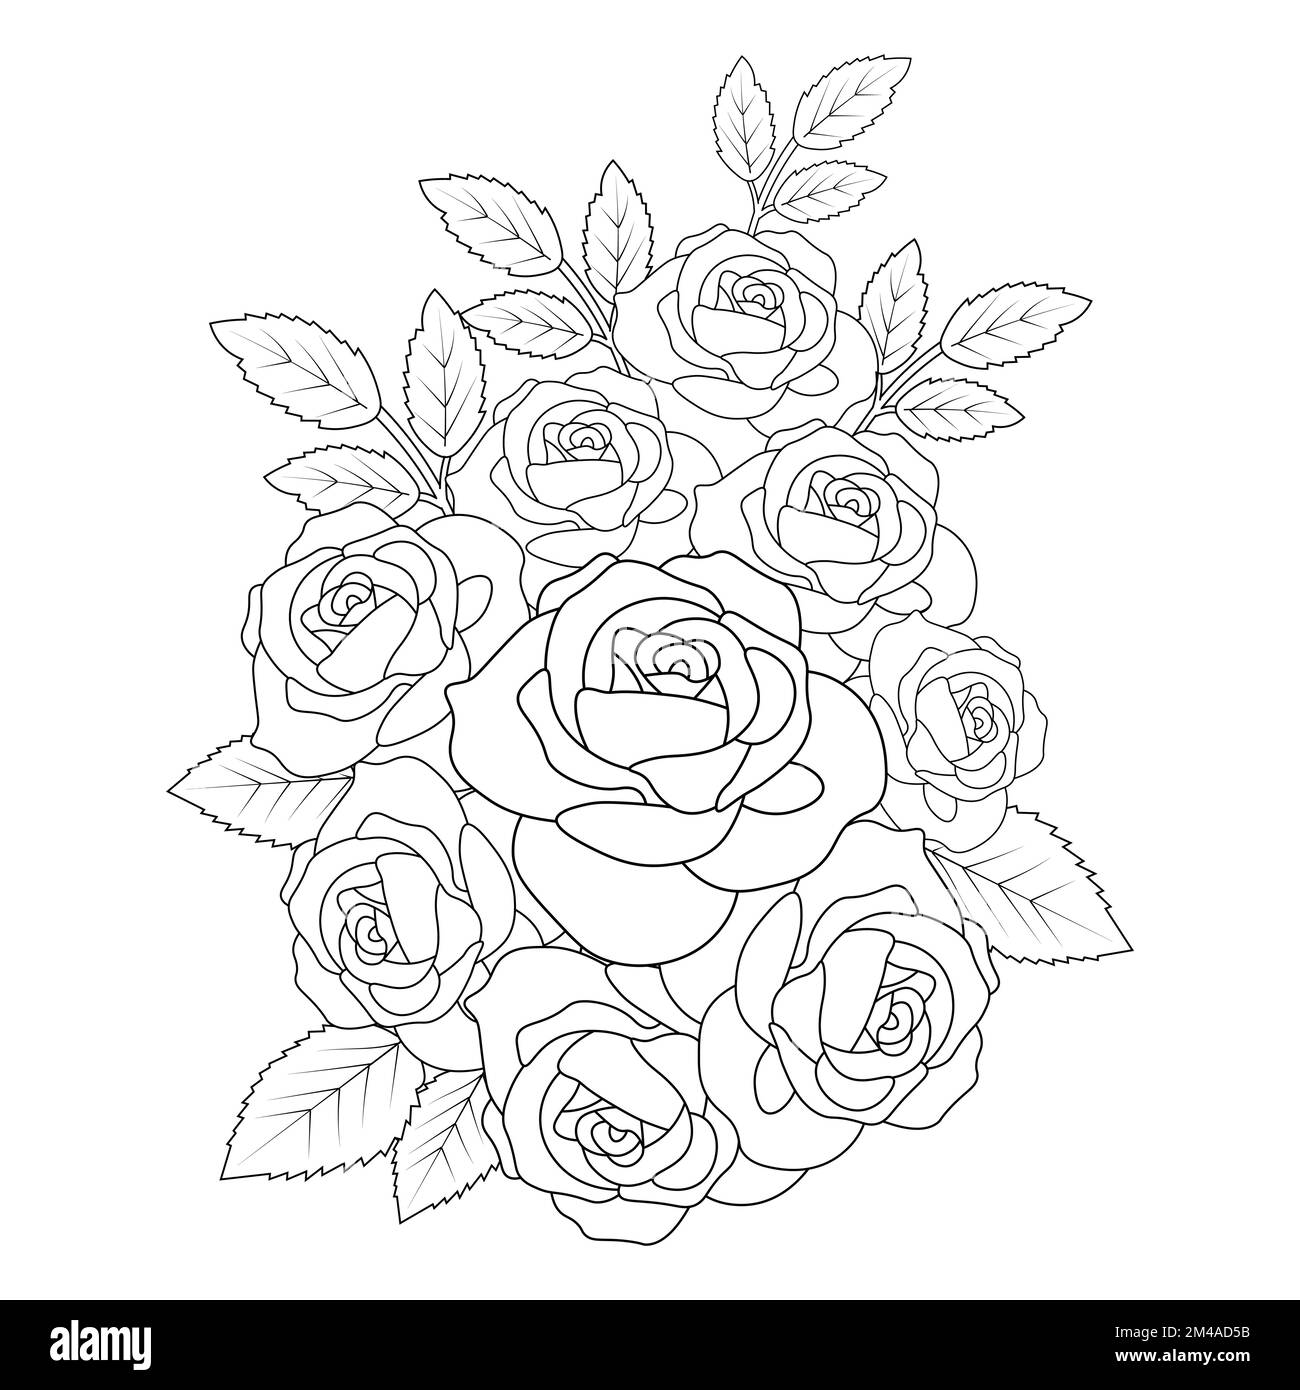 Adult coloring book page of pink rose illustration with leaves and pencil sketch drawing stock vector image art